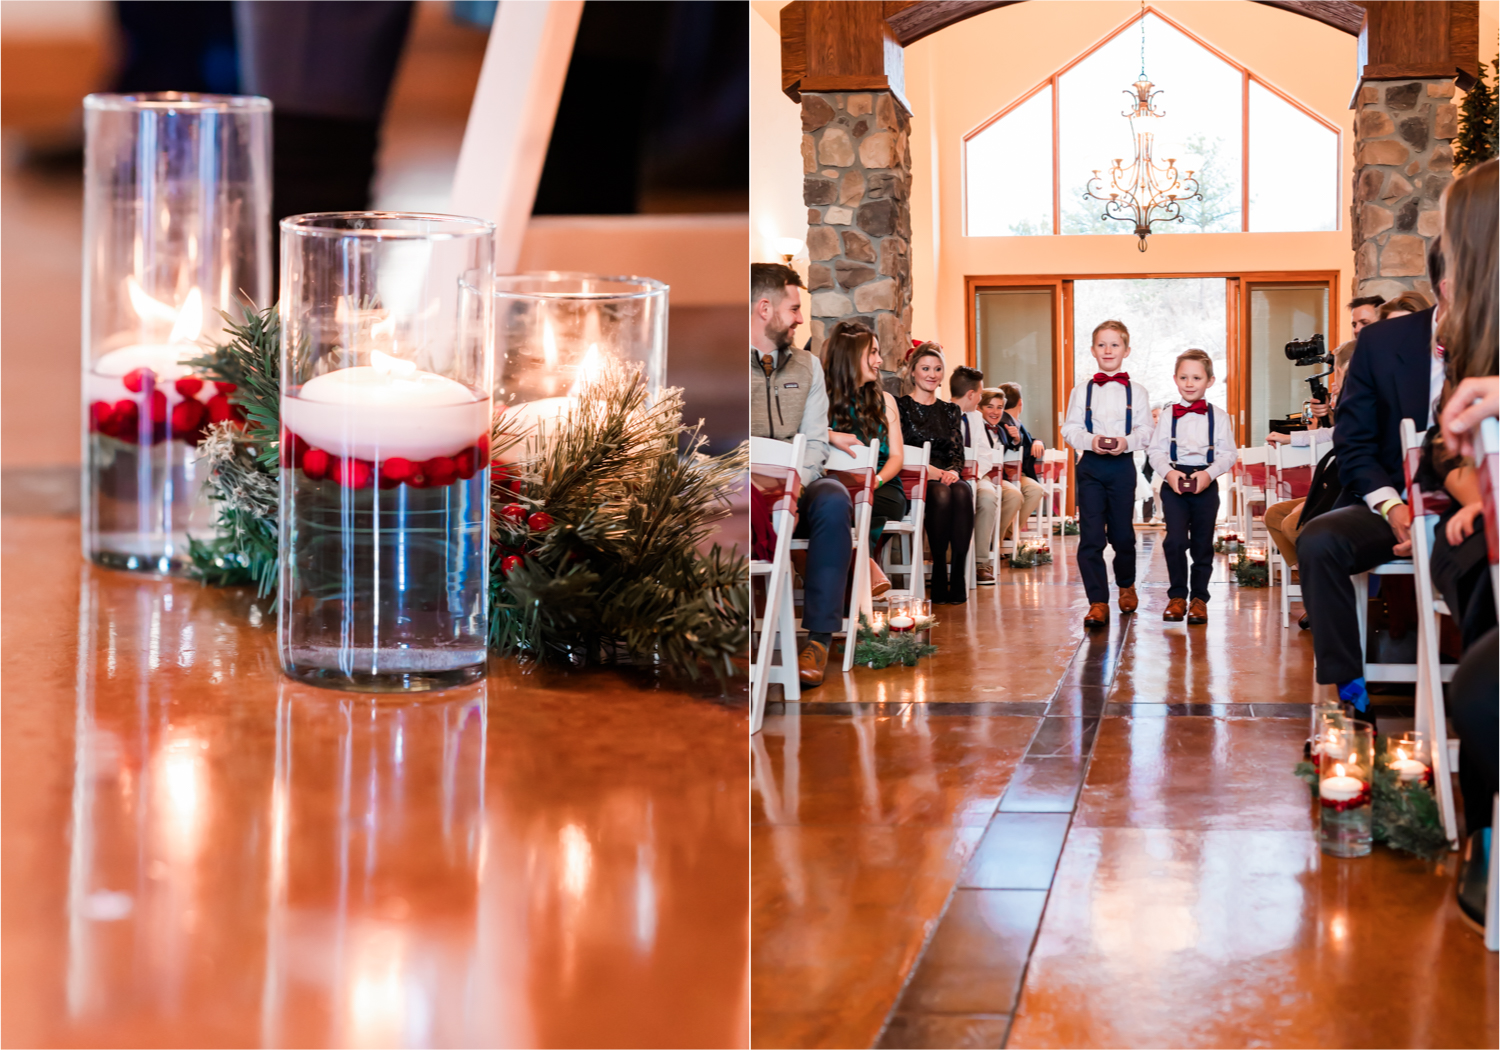 Winter Wonderland Wedding in Colorado Springs | Britni Girard Photography Colorado Wedding Photography and Film Team | Snow covered mountains and Christmas just a few days away | Annika + John's Nostalgic Winter Wedding | Bride's Dress iDream Bridal Essence of Australia | Air Force Academy | Ceremony Entrance Rustic Cabin 